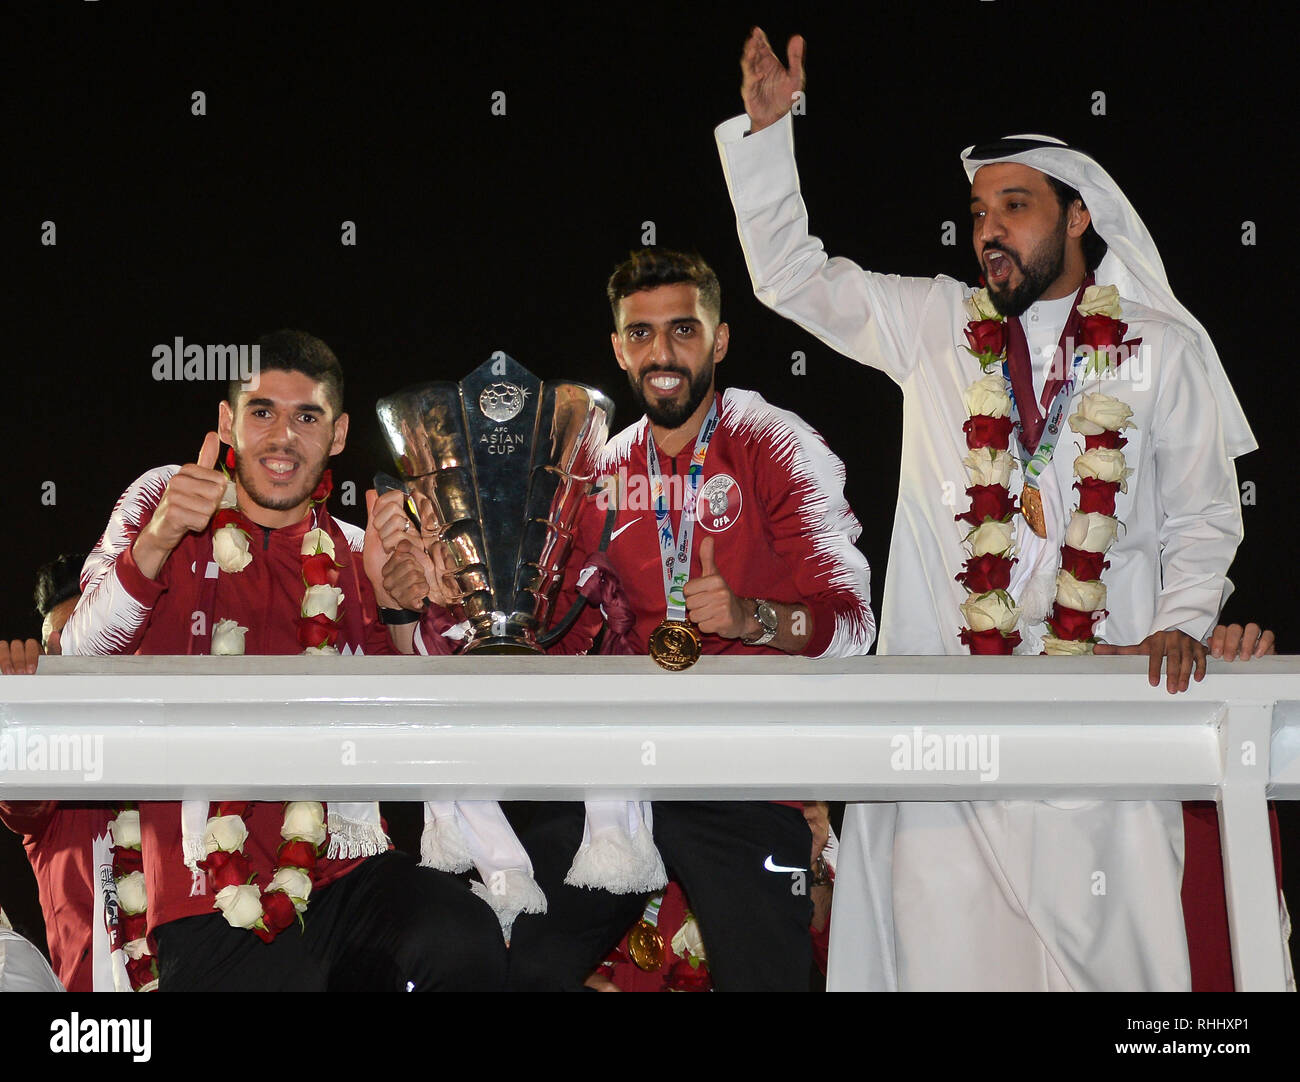 Doha, Qatar. . 2nd Feb, 2019. Qatar national soccer team captain and forward Hasan Al Haydos (C) and midfielder Karim Boudiaf hold the trophy upon arrival at Doha International Airport in Doha, Qatar on Feb. 2, 2019. Qatar won 3-1 over Japan to claim the title of the AFC Asian Cup for the first time. Credit: Nikku/Xinhua/Alamy Live News Stock Photo